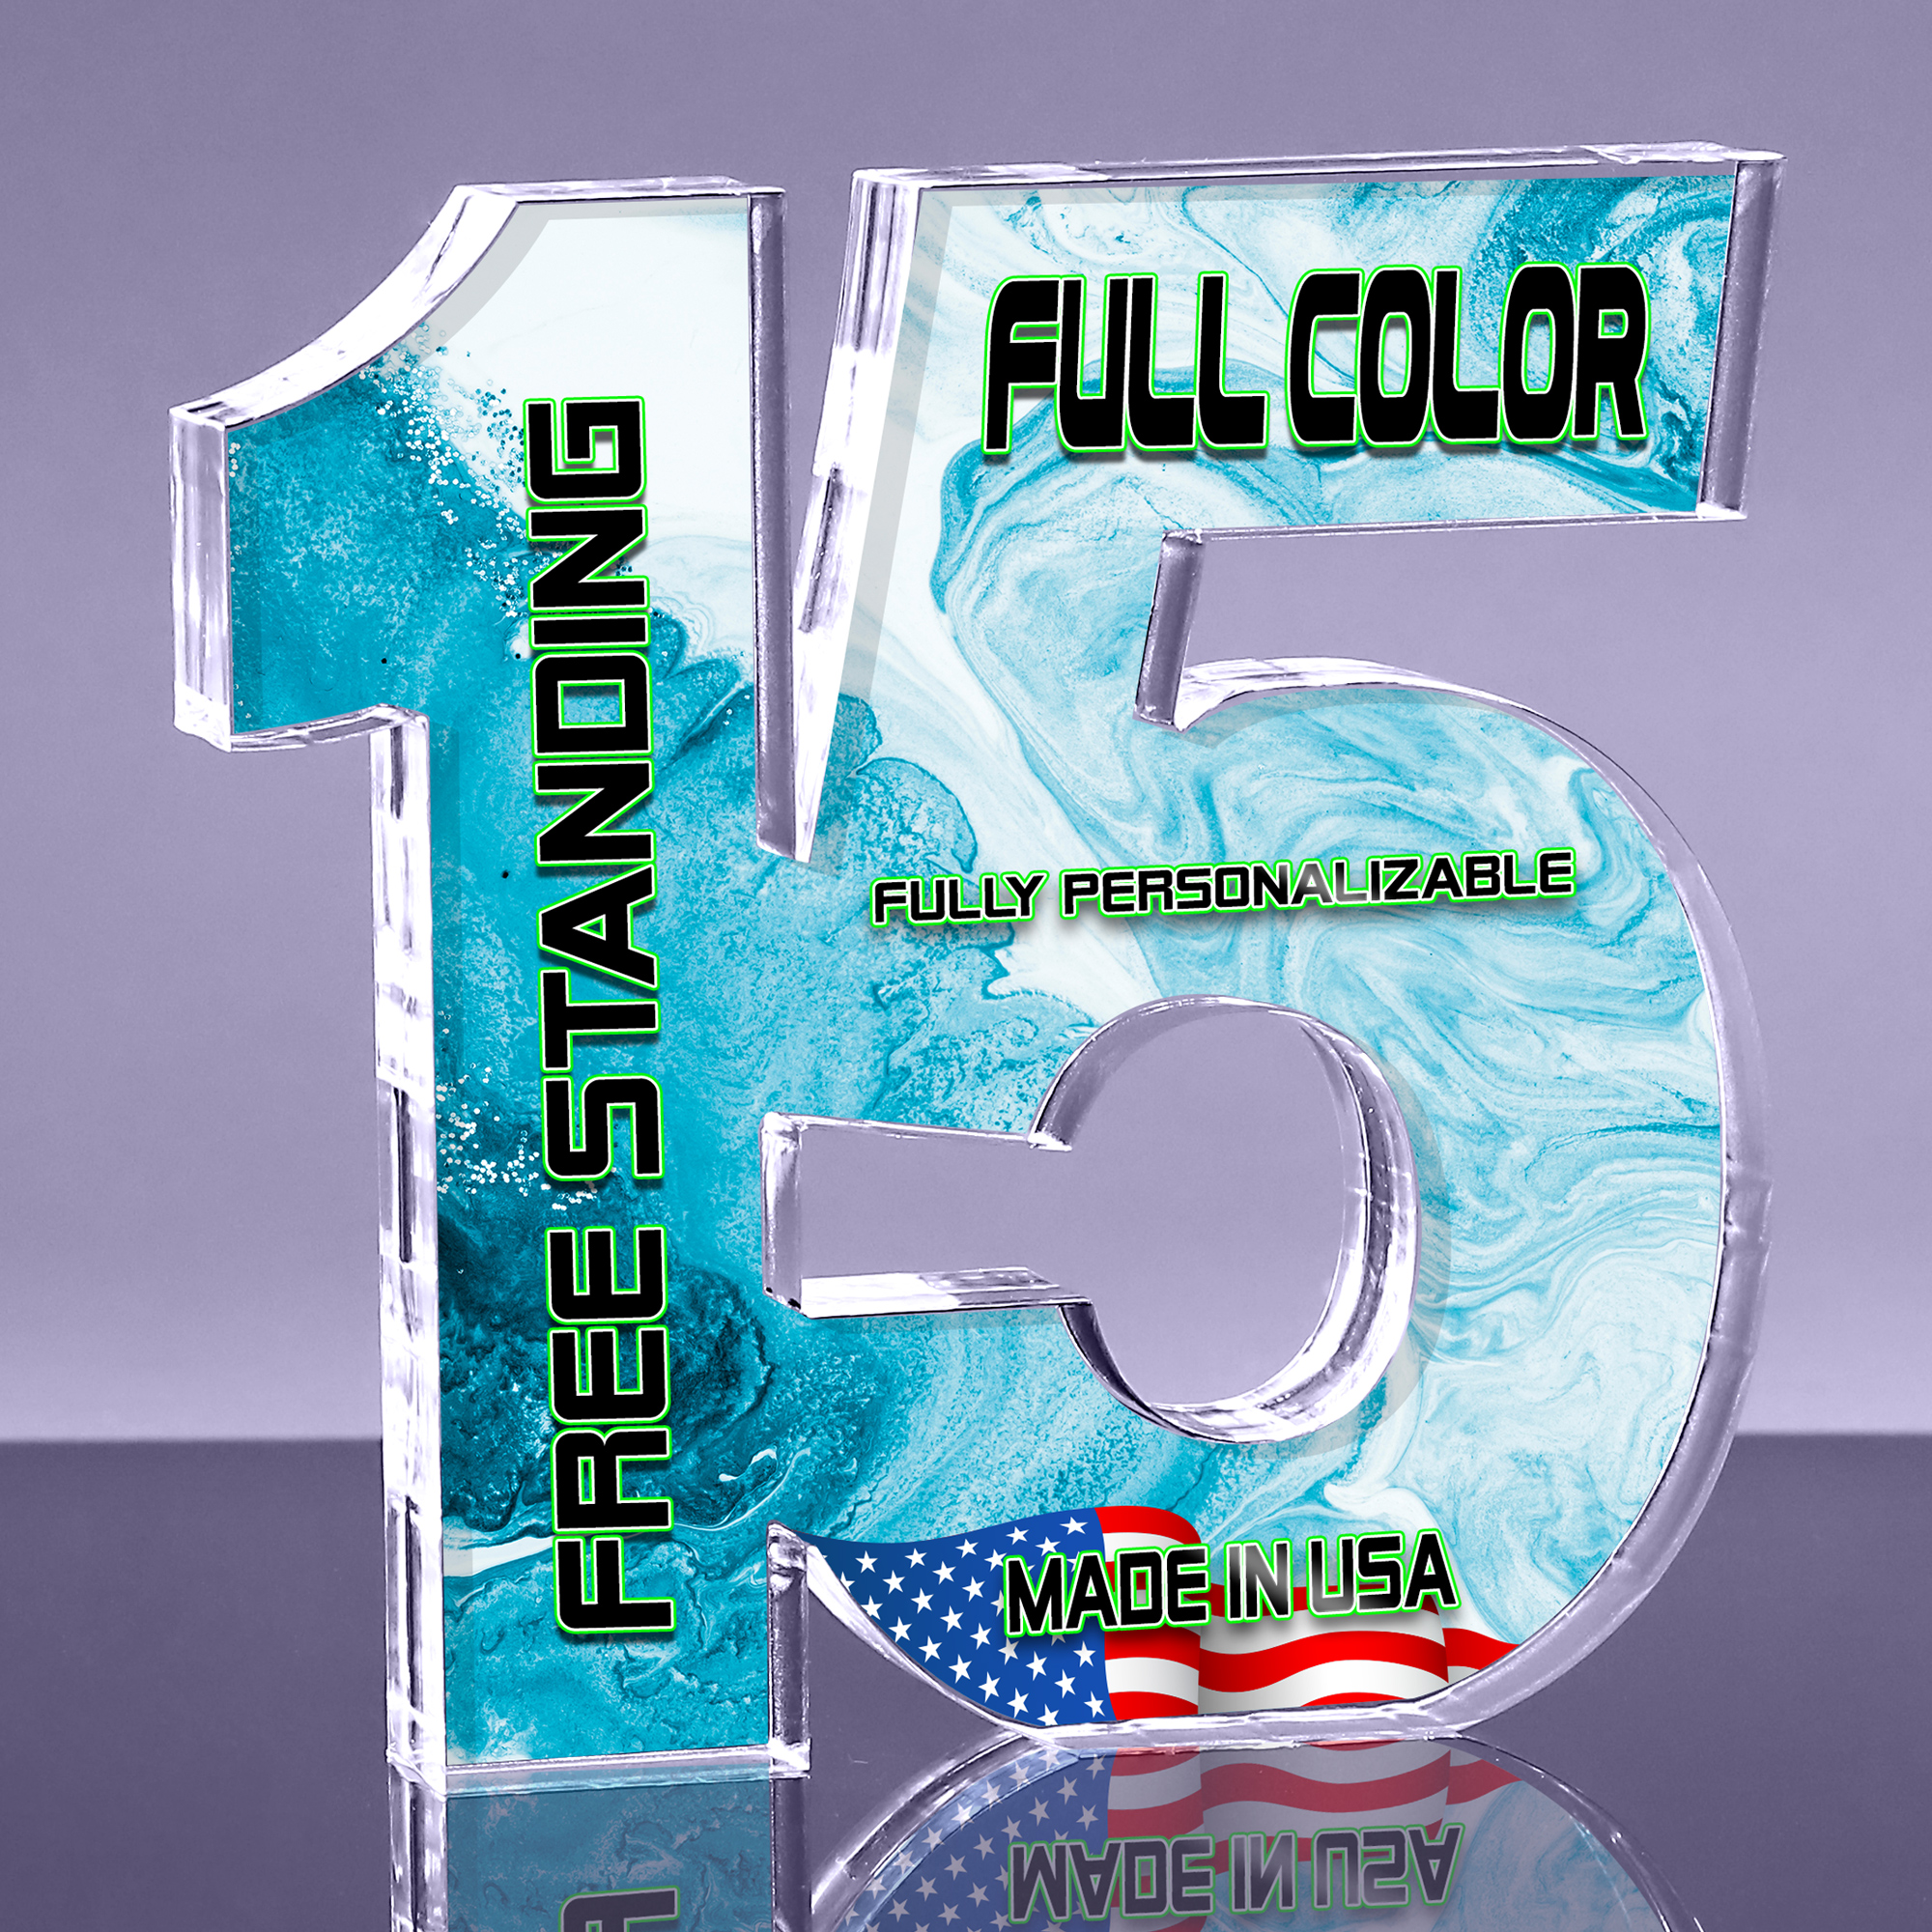 15 Color Acrylic Award - 6.5 x 6.5 x 1 inch Thick